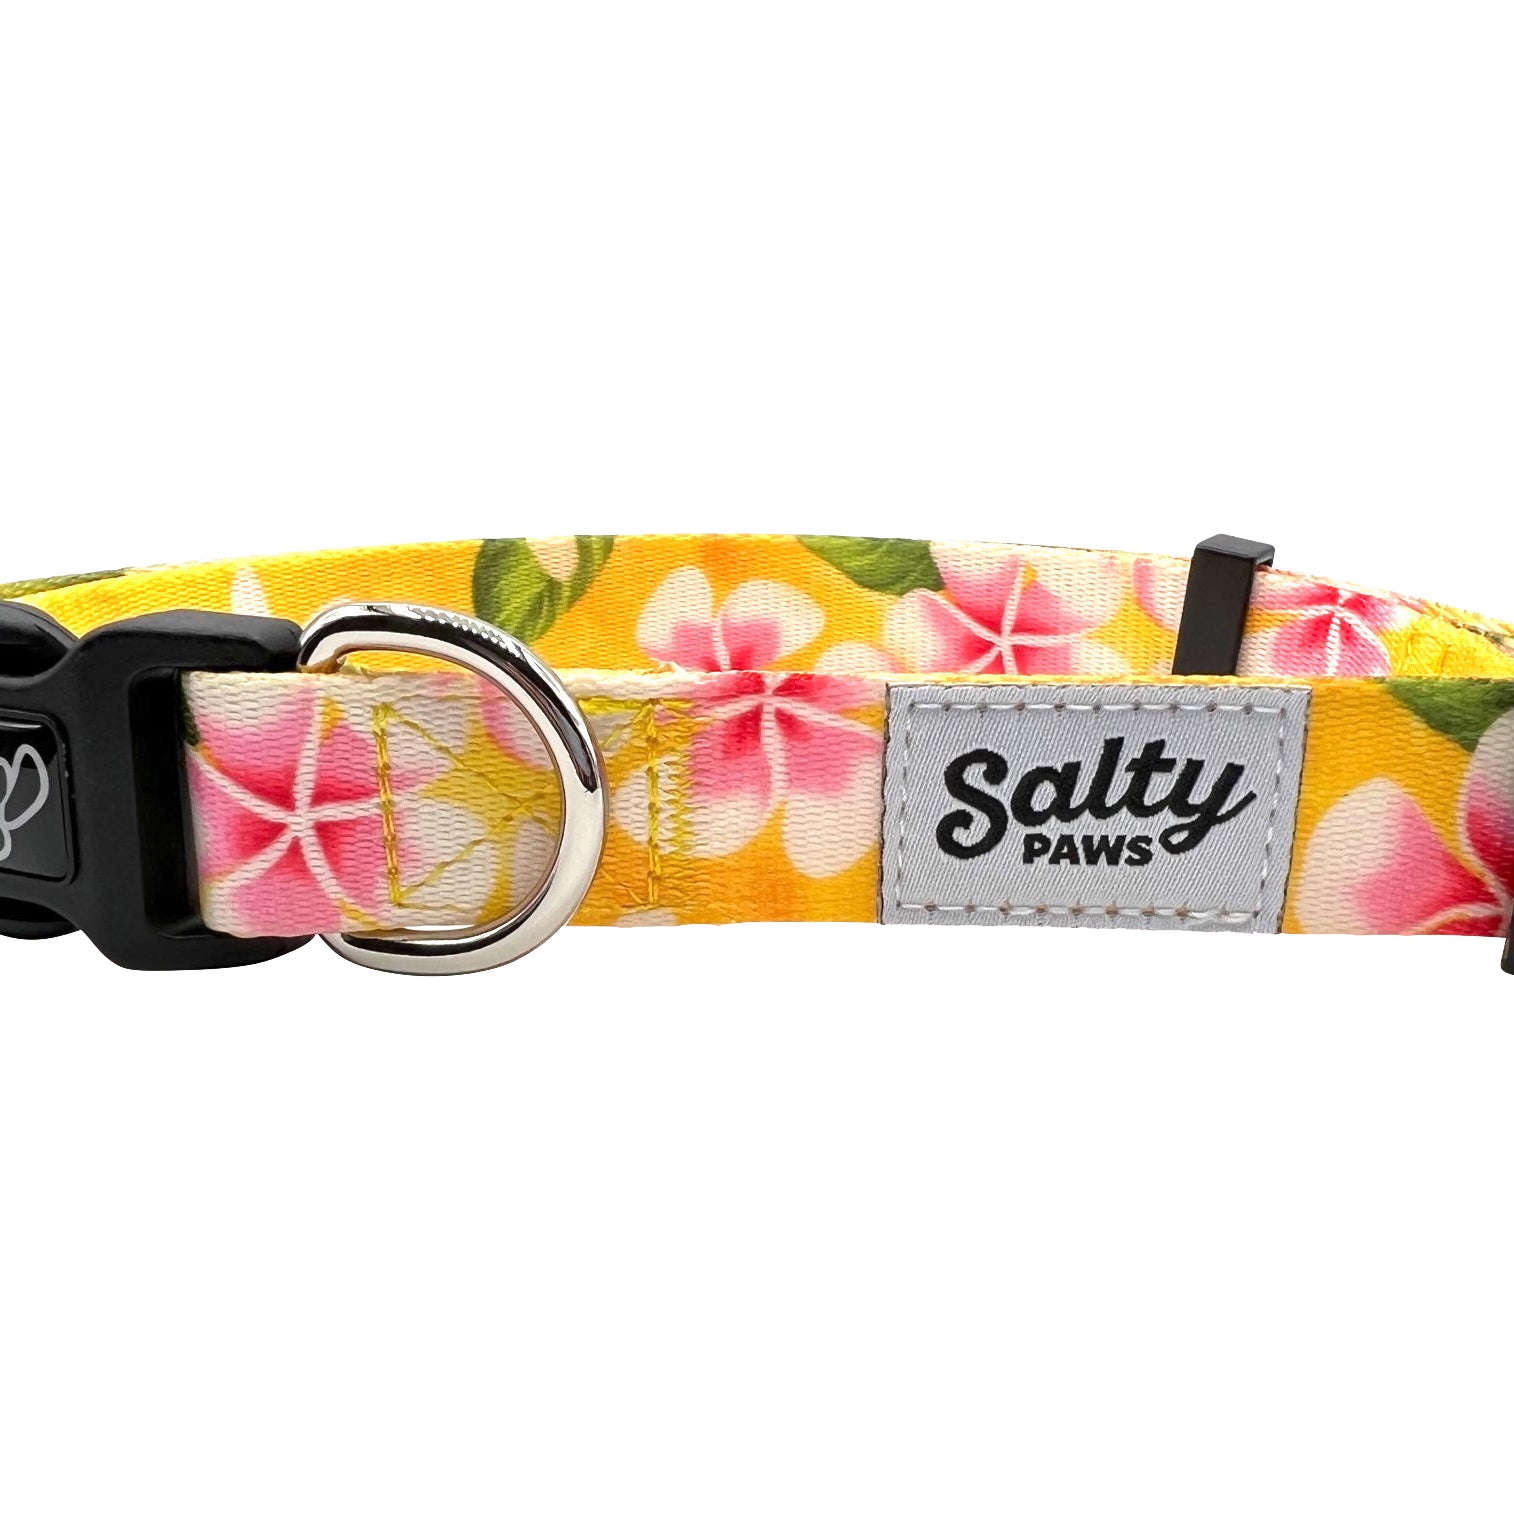 Salty Paws Surfing Dog Collar | Designs for Beach Dogs,  Floral, Fishing, Surfing, Hawaiian,  Yellow Floral S